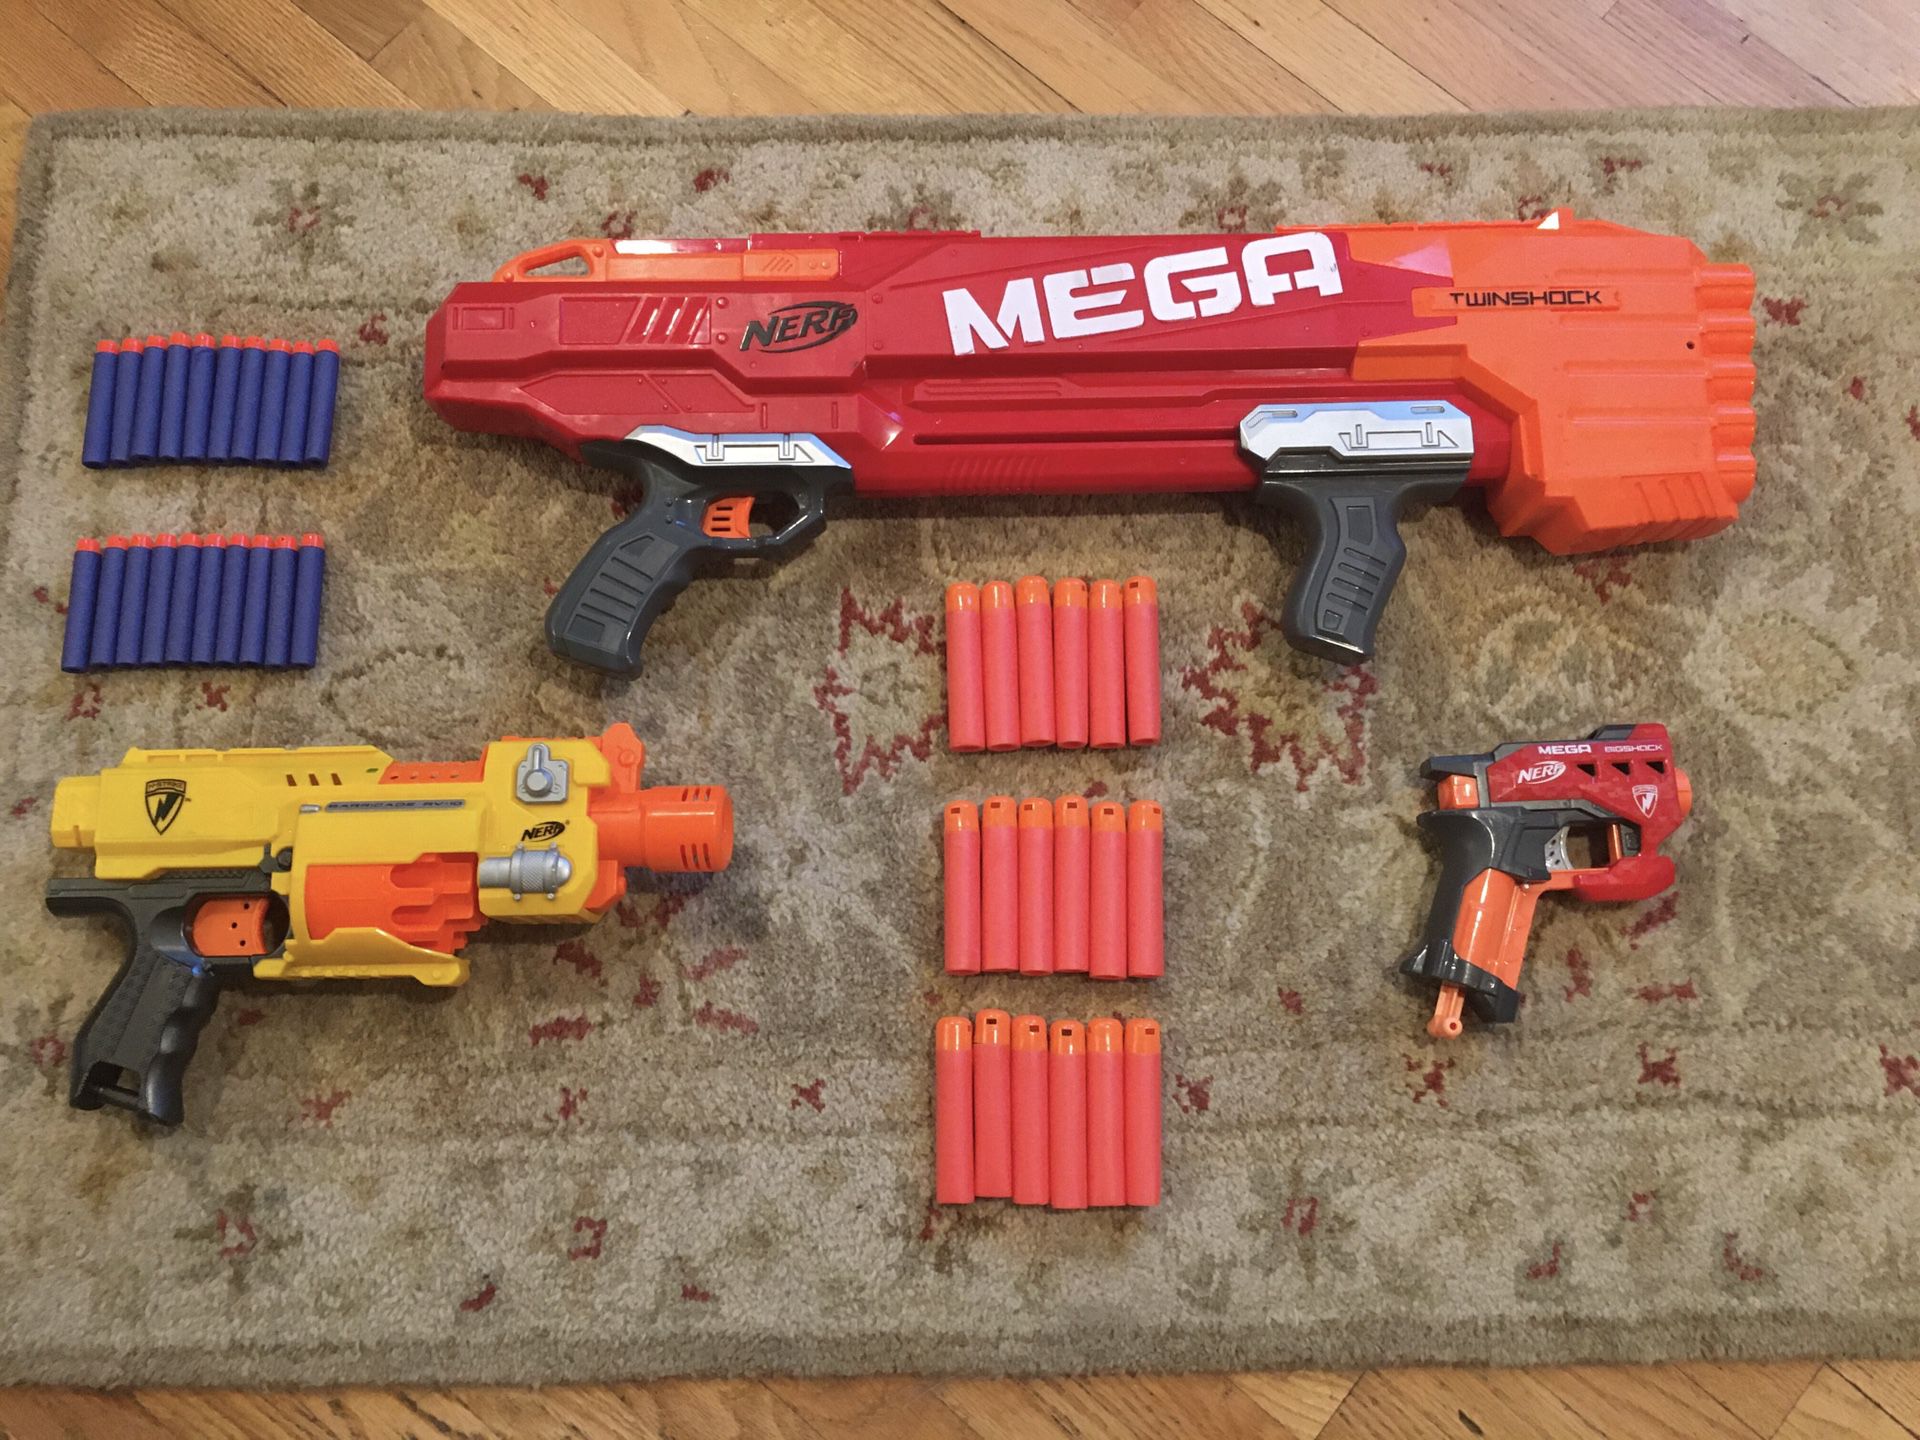 Nerf gun lot with Mega Twinshock, Barricade, and more